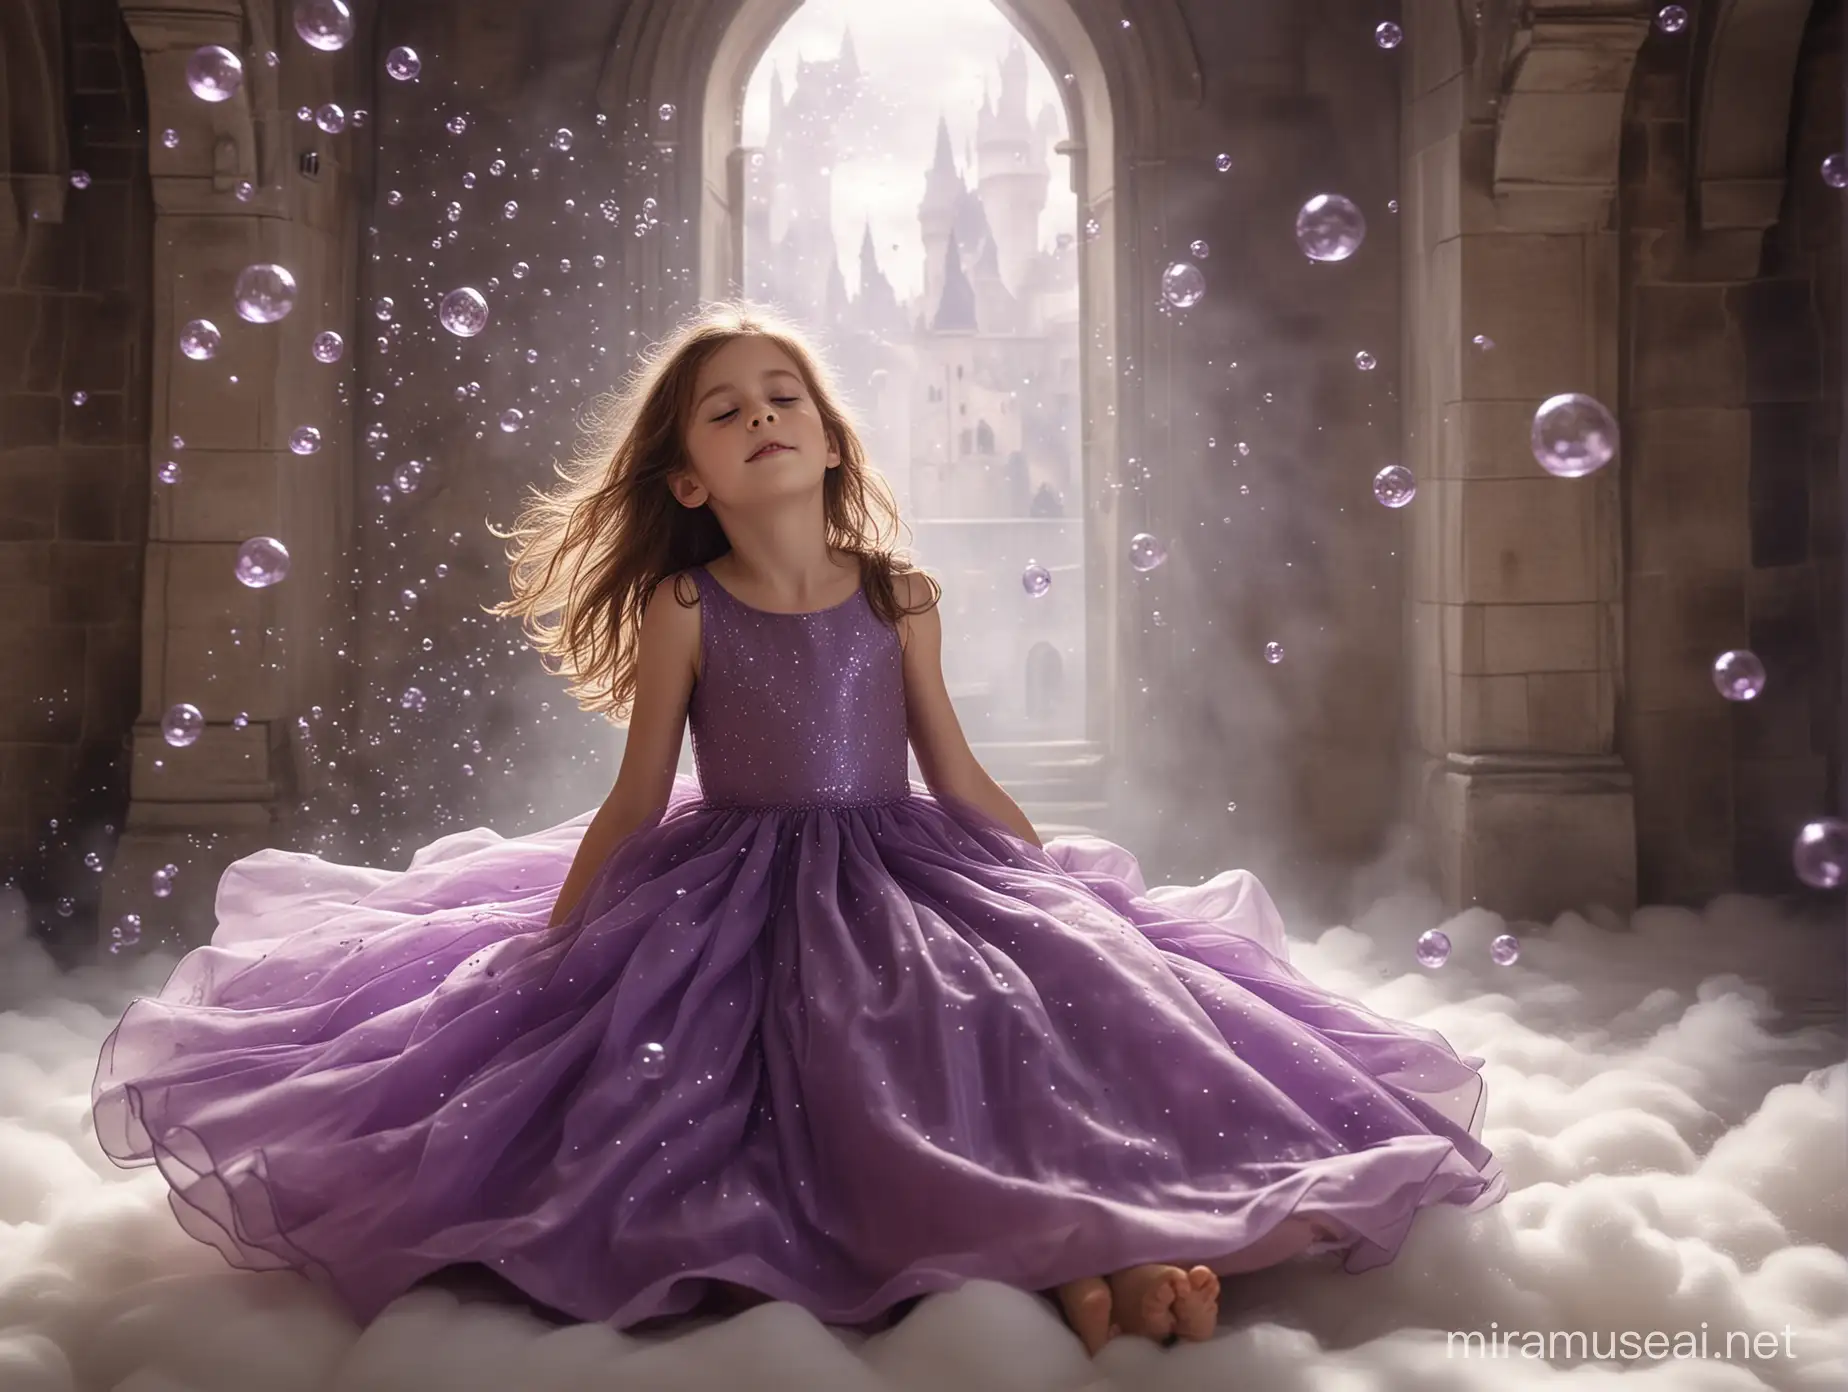 Serene 6YearOld Girl Floating in Fairy Castle Amidst Glowing Bubbles